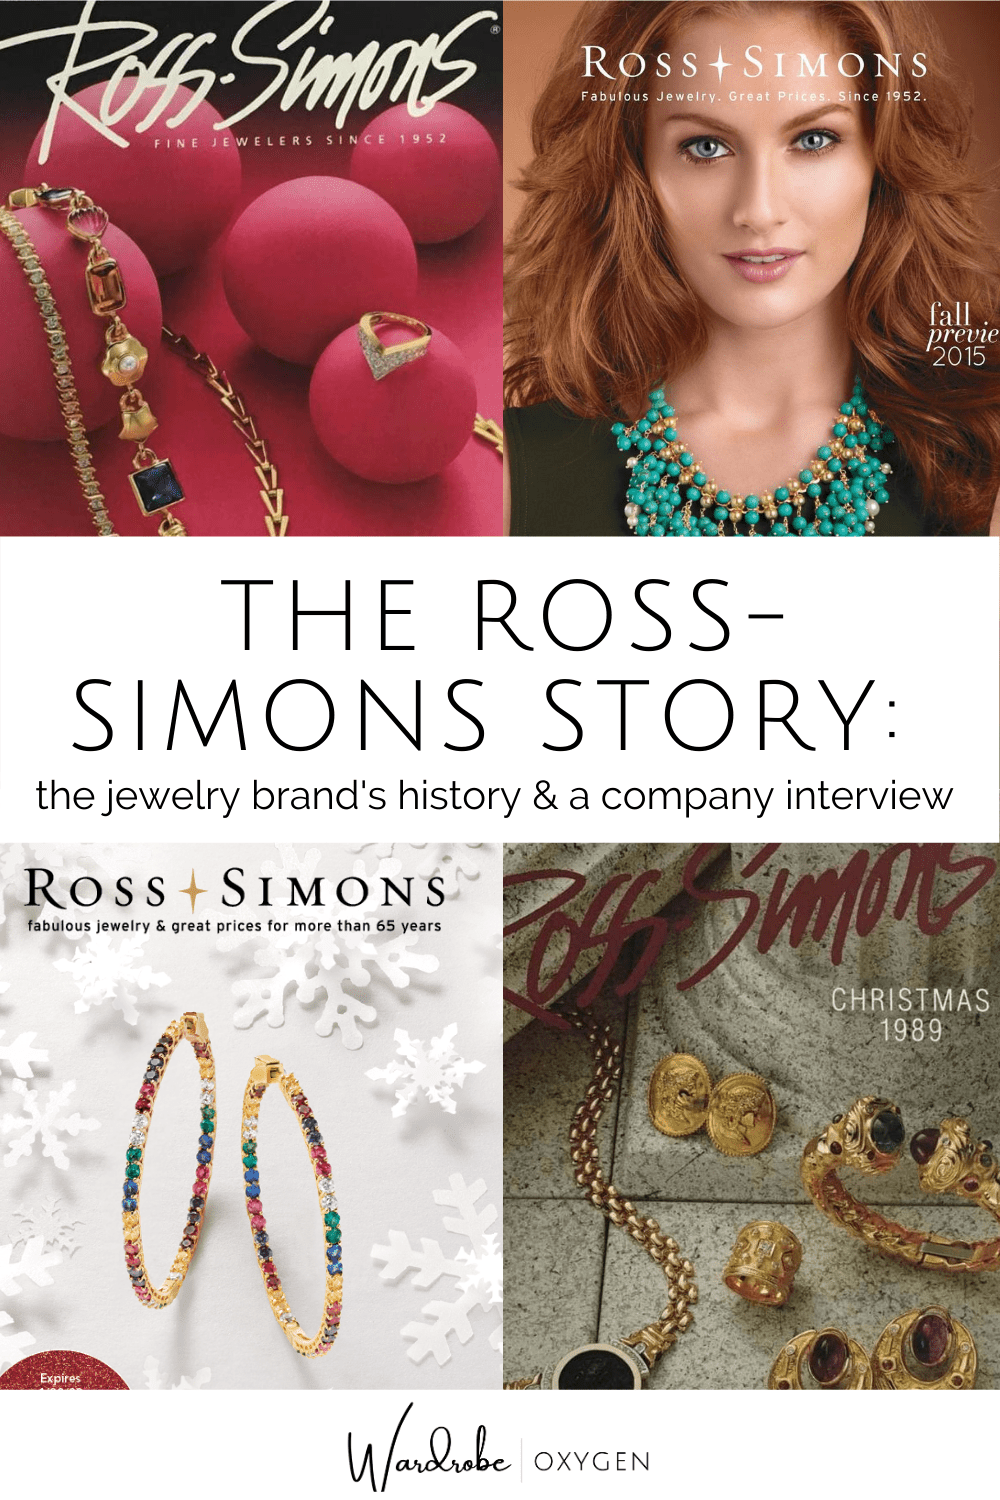 Ross-Simons: Then and Now